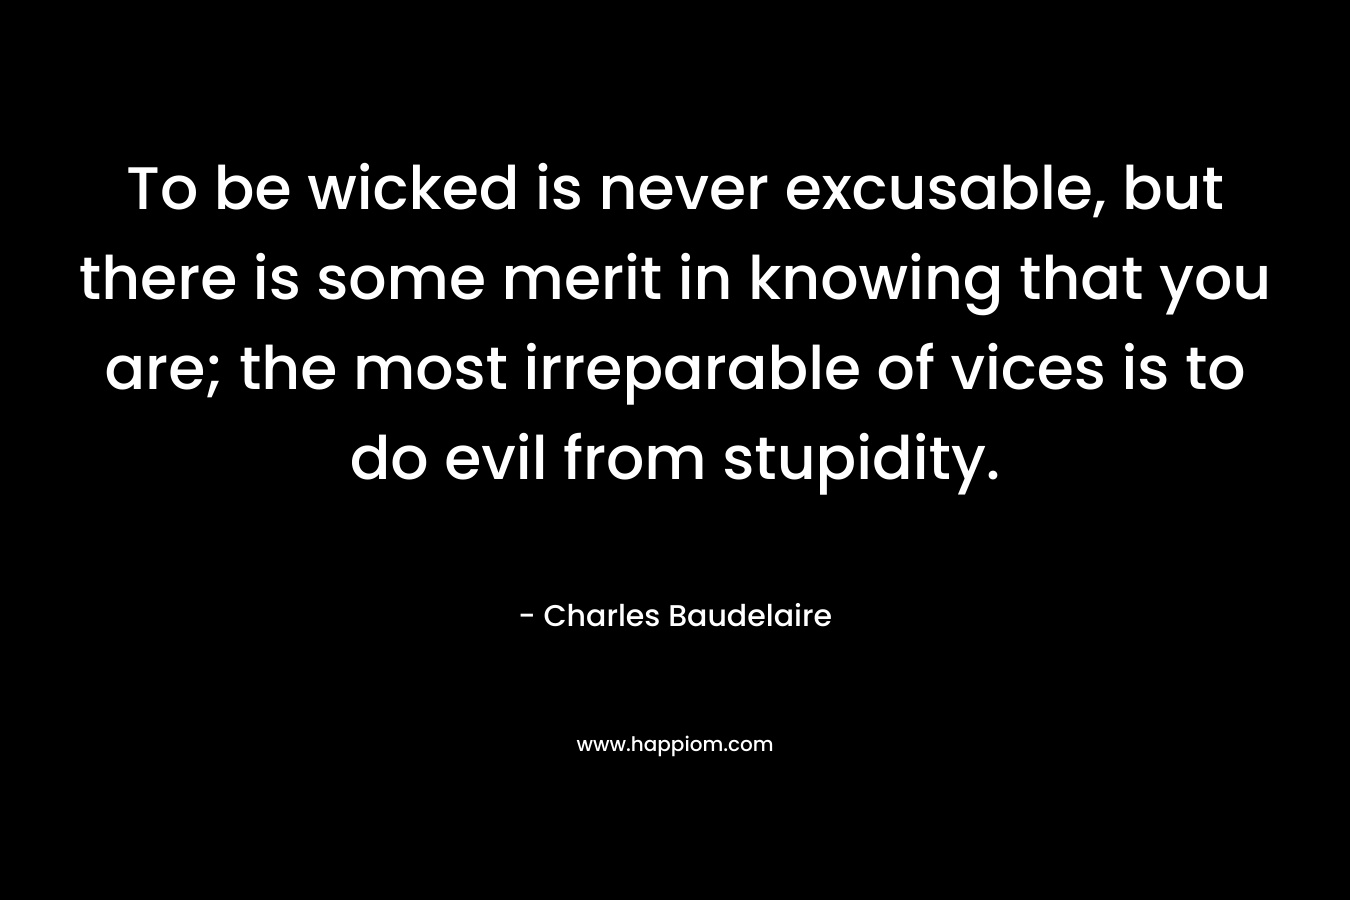 To be wicked is never excusable, but there is some merit in knowing that you are; the most irreparable of vices is to do evil from stupidity.